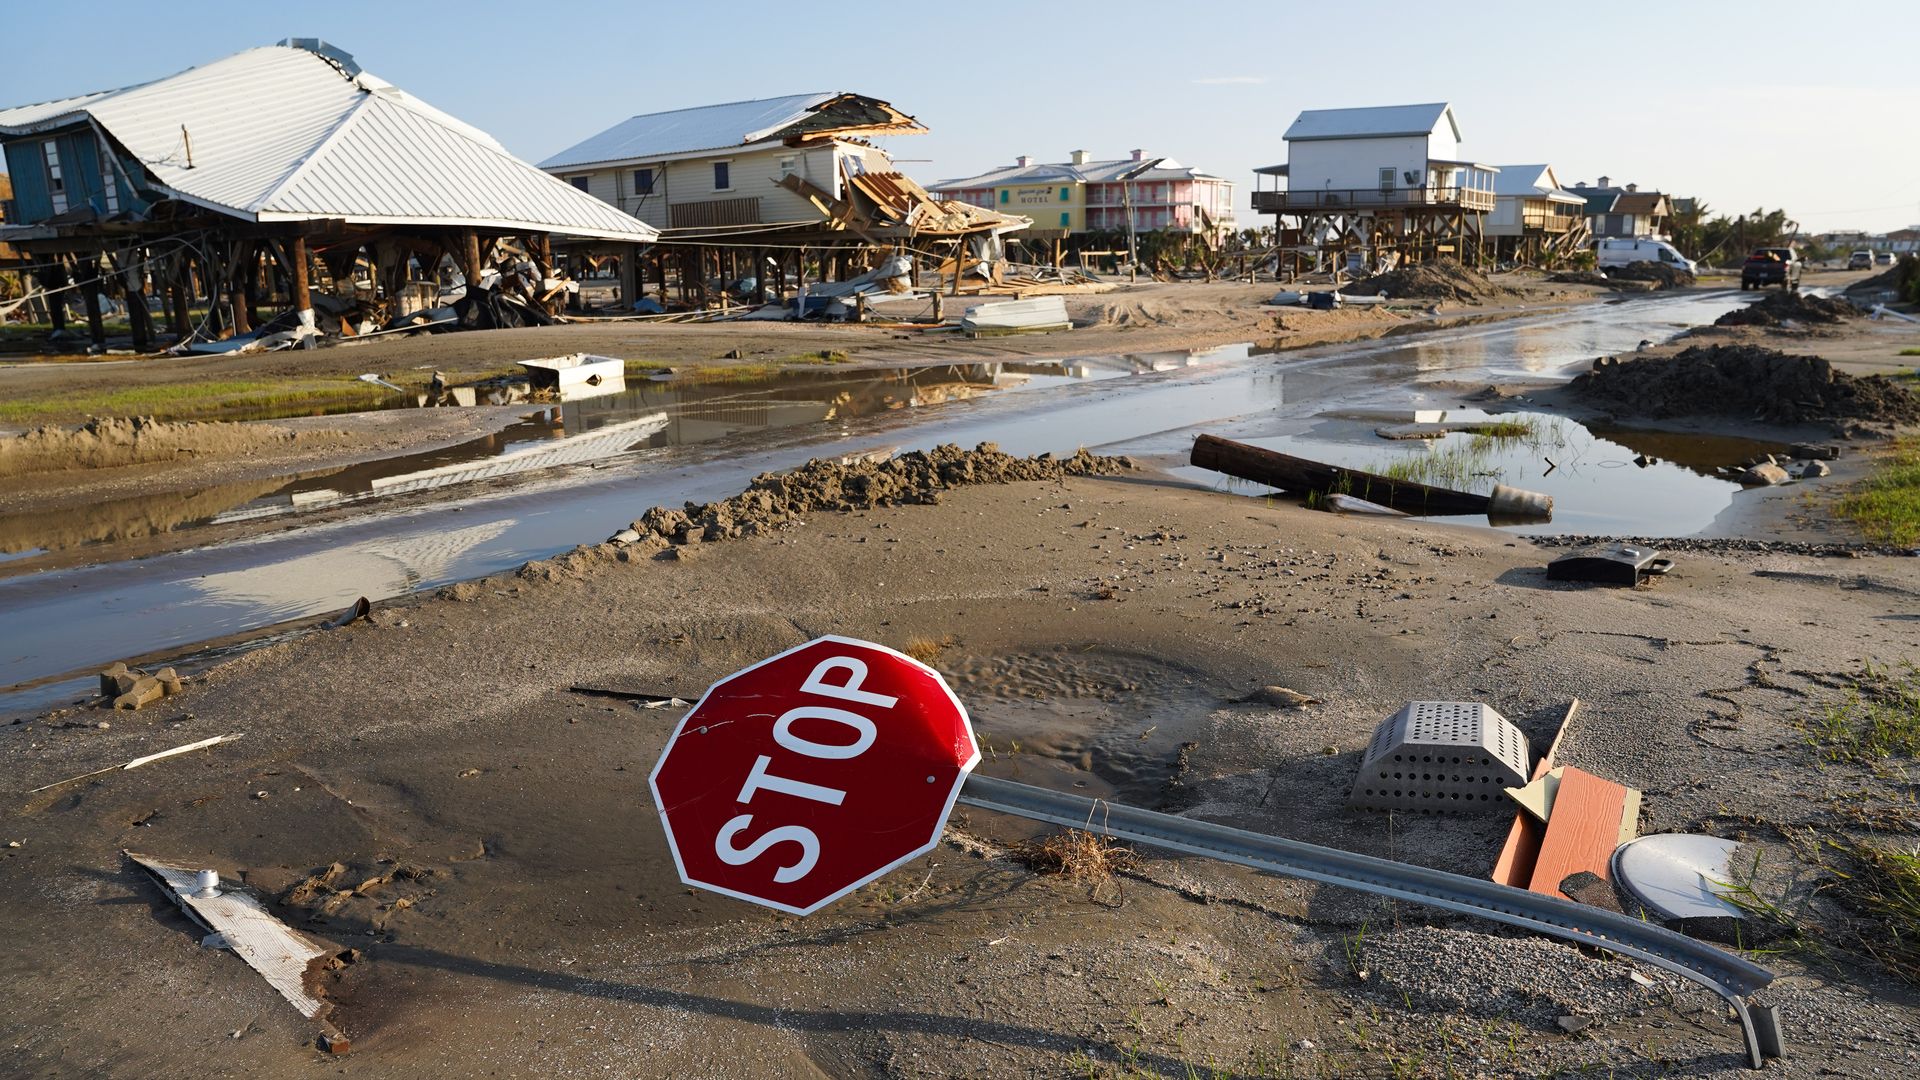 Bent stop sign with damaged homes in the background following Hurricane Ida's landfall in Louisiana.